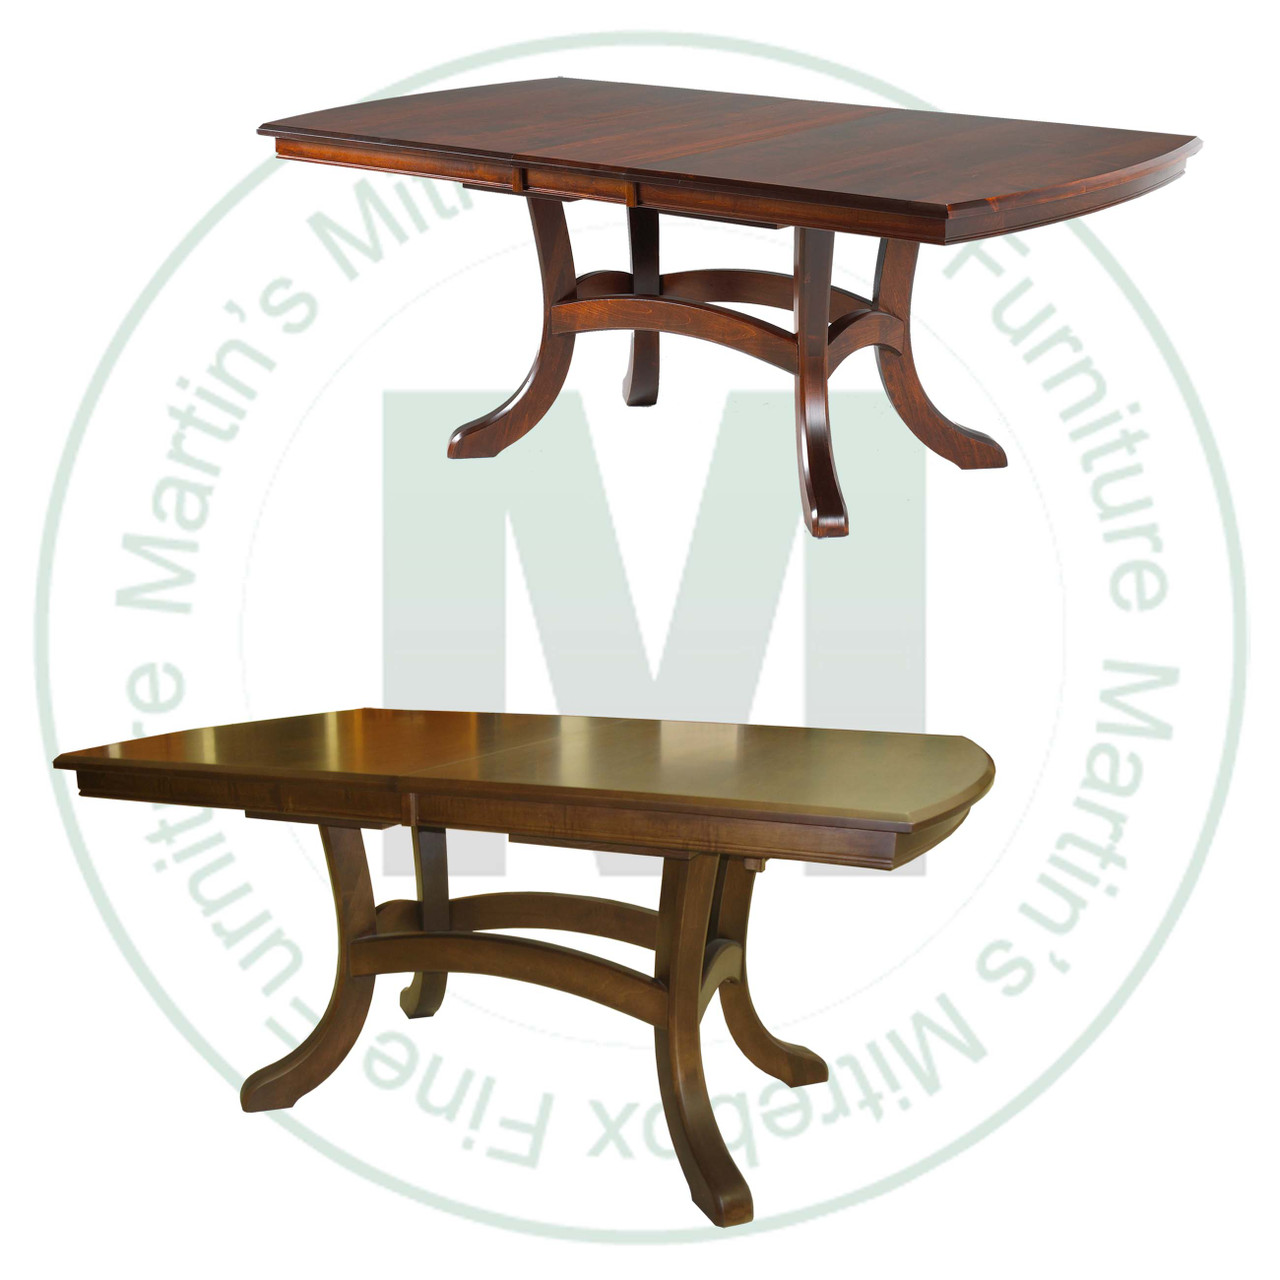 Maple Jordan Double Pedestal Table 48''D x 96''W x 30''H With 2 - 12'' Leaves. Table Has 1.25'' Thick Top